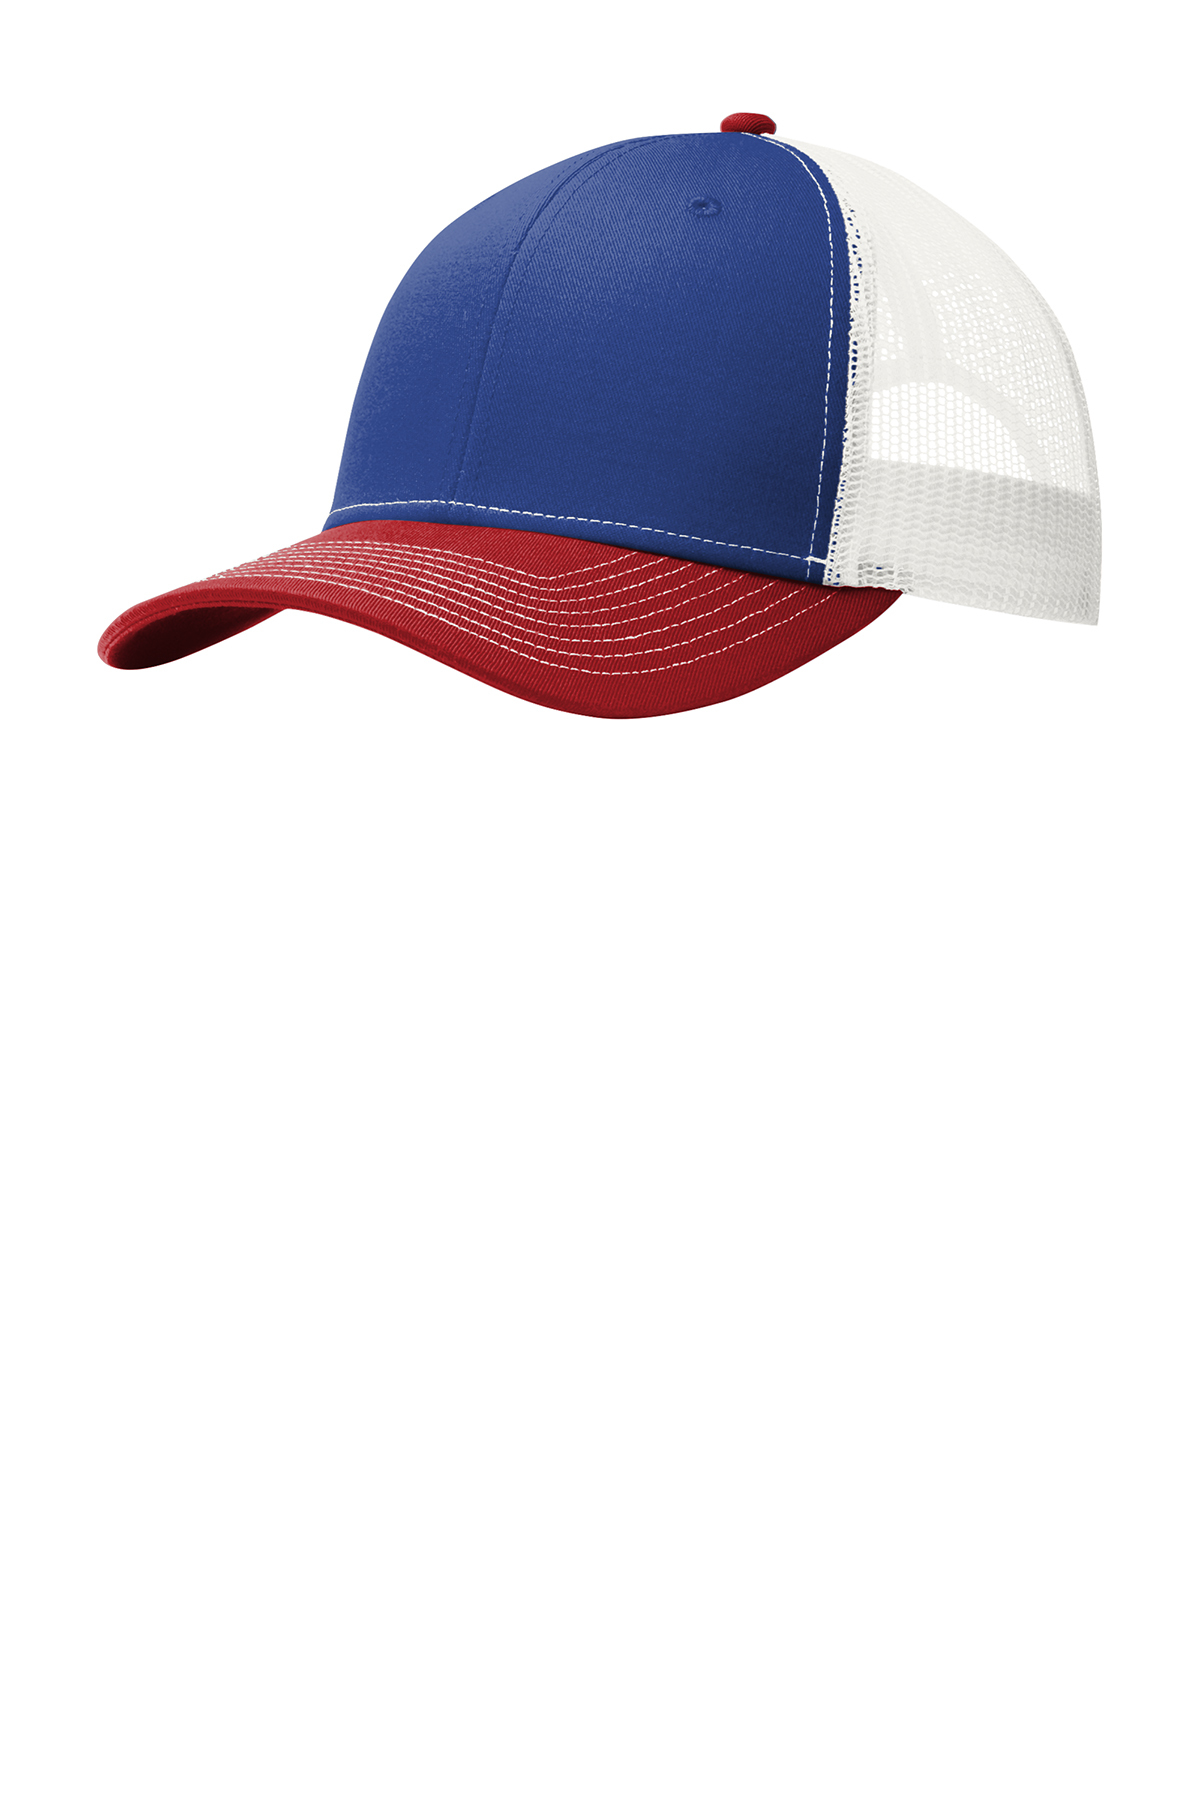 Patriot Blue/Flame Red/White